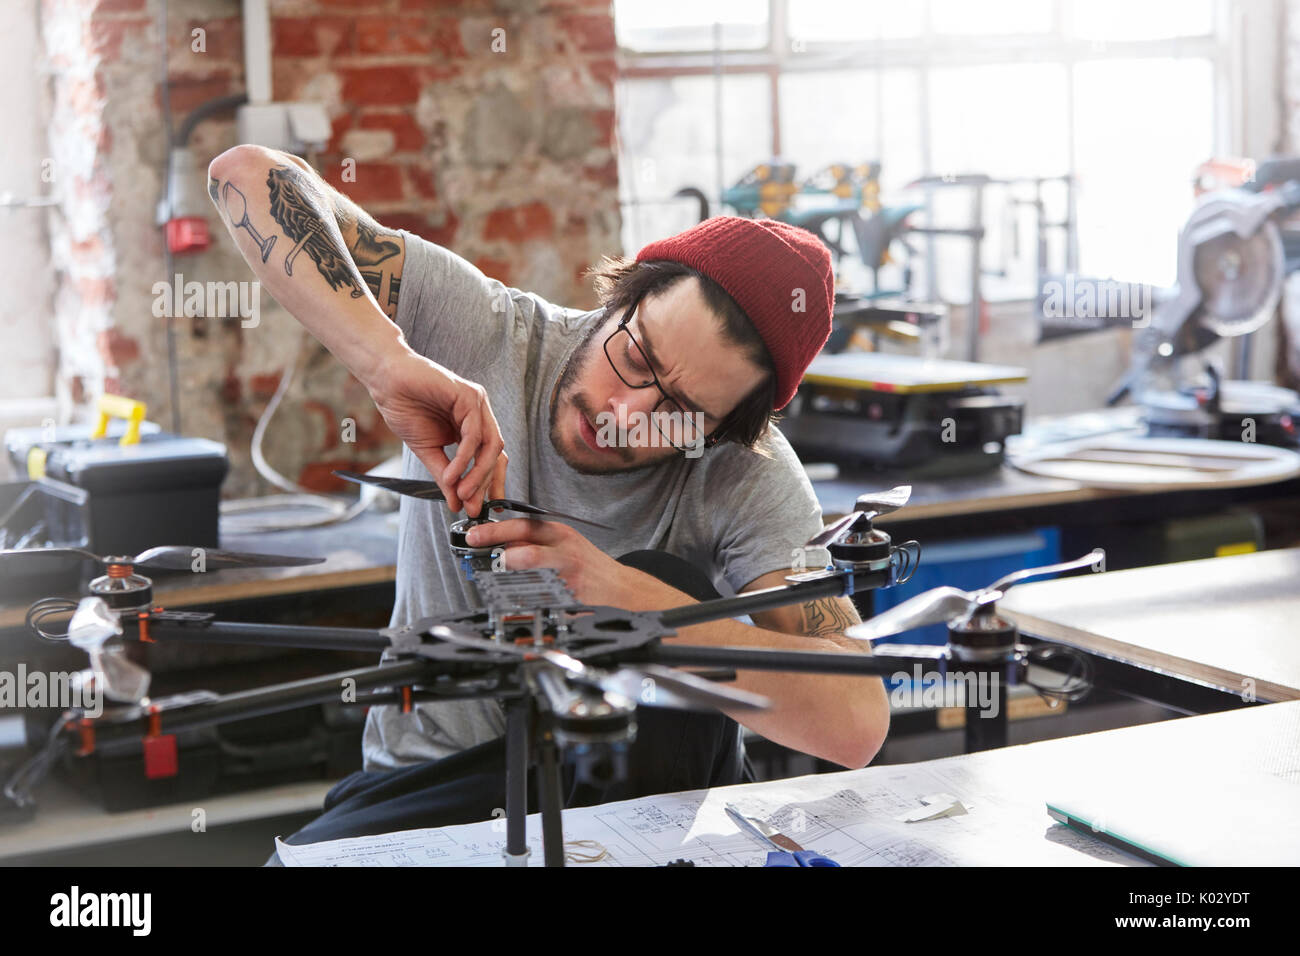 Male designer with tattoos assembling drone in workshop Stock Photo